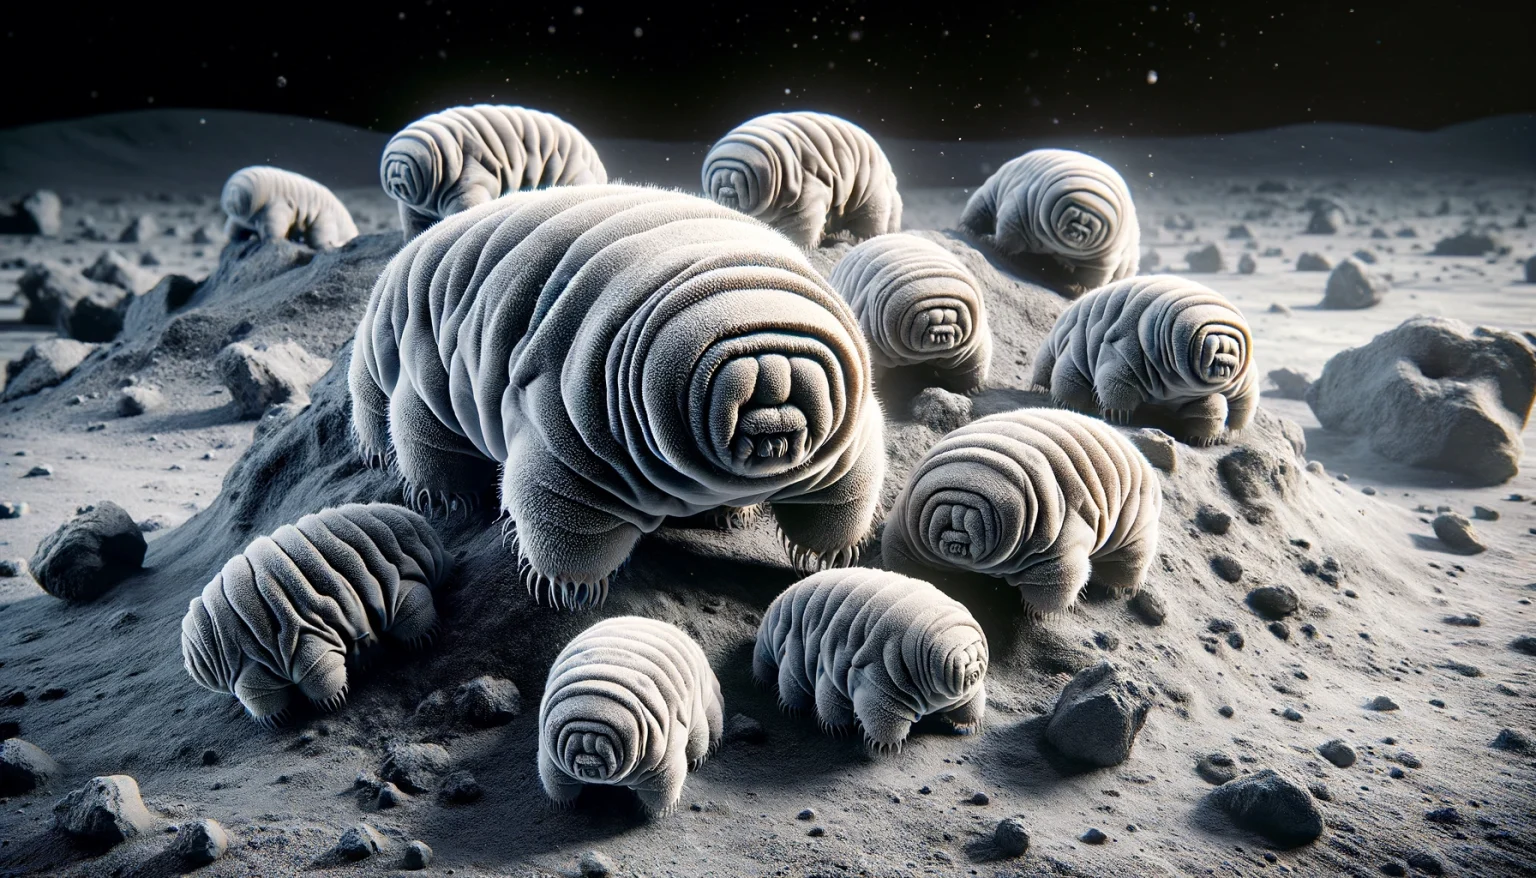 Tardigrades Scattered Across the Moon from a Spacecraft Crash Might Be Surviving